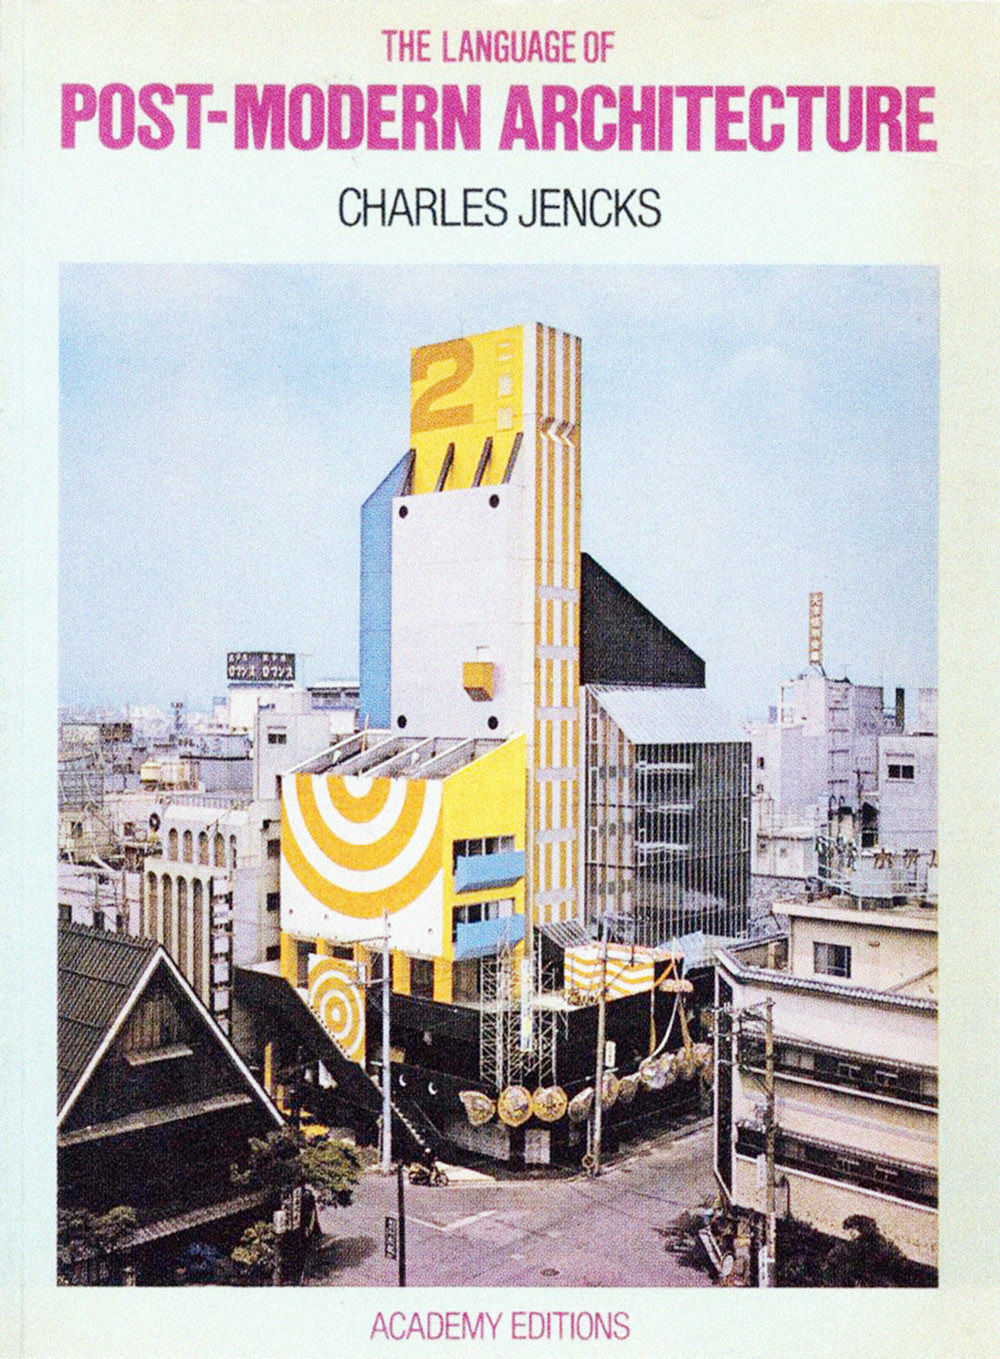 Cover of The Language of Post-Modern Architecture by Charles Jencks, 1977